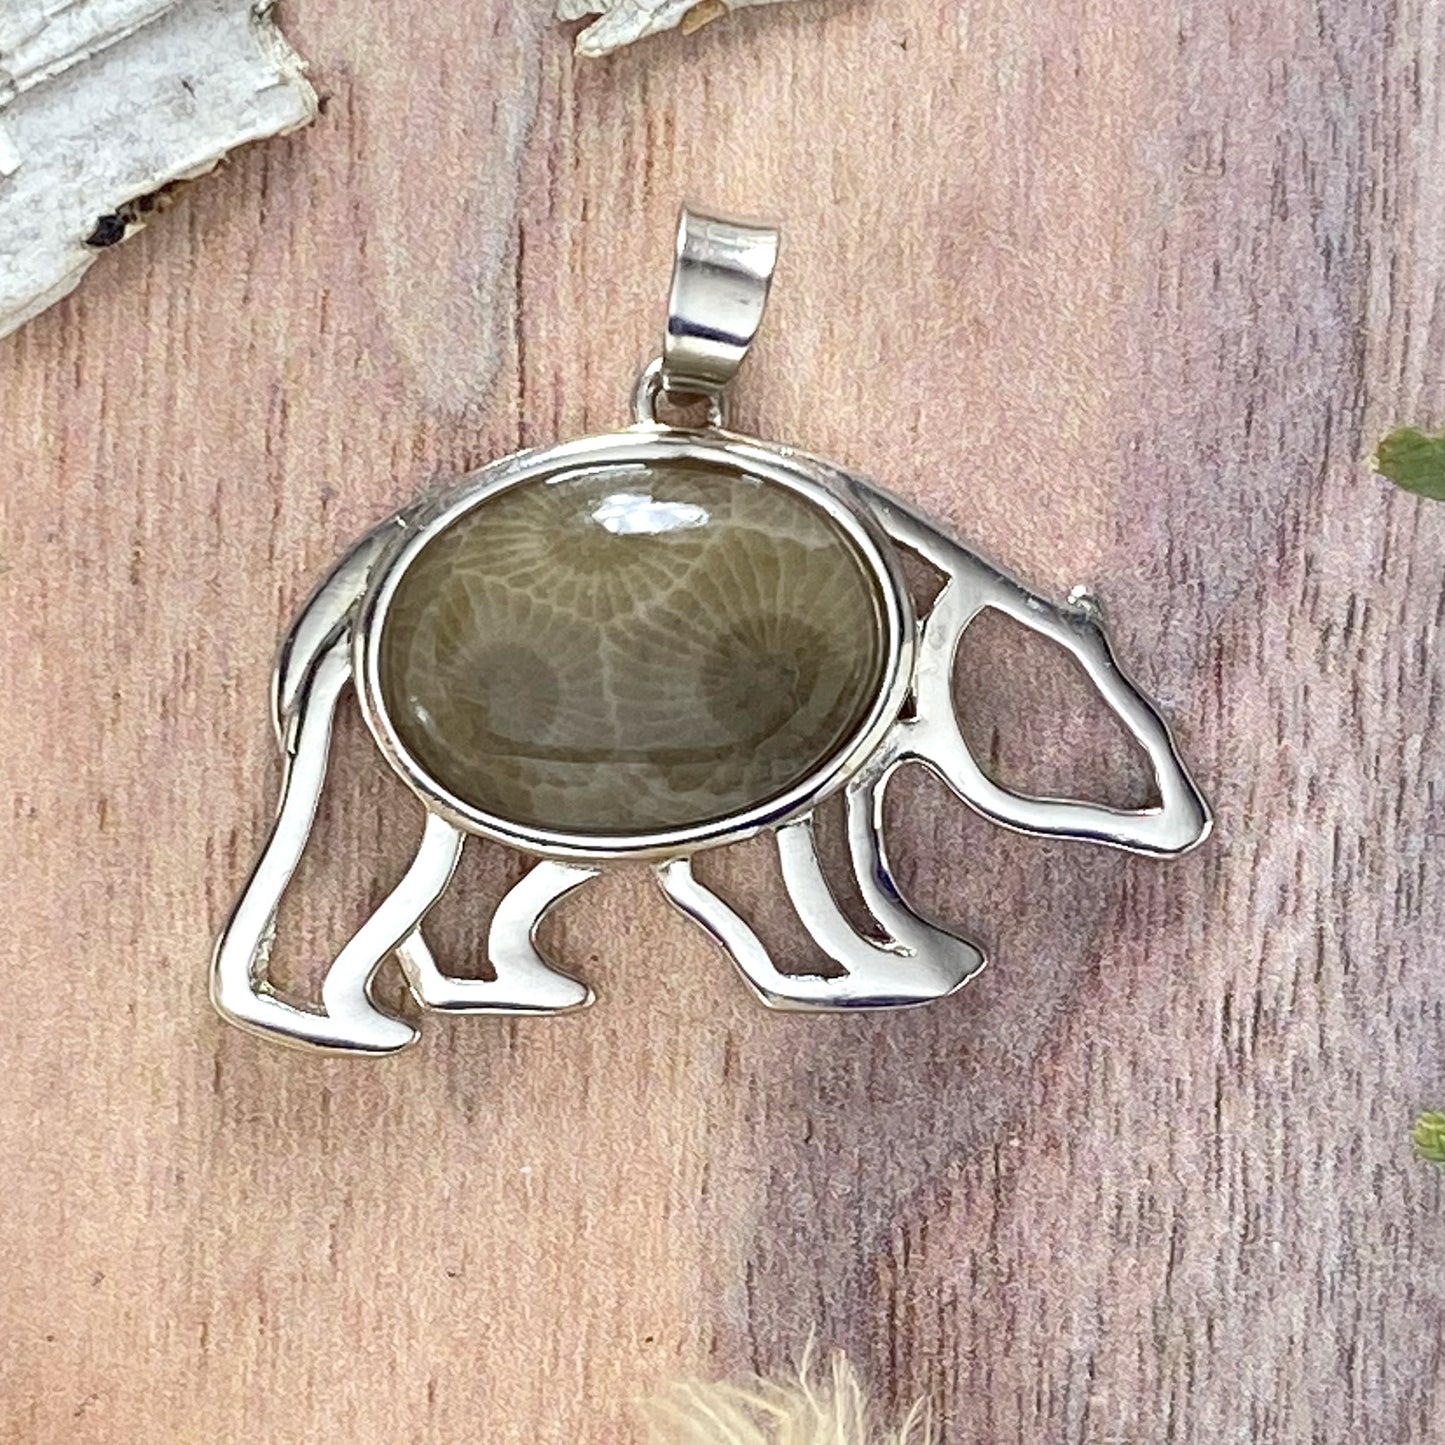 Petoskey Stone Bear Pendant Front View - Stone Treasures by the Lake